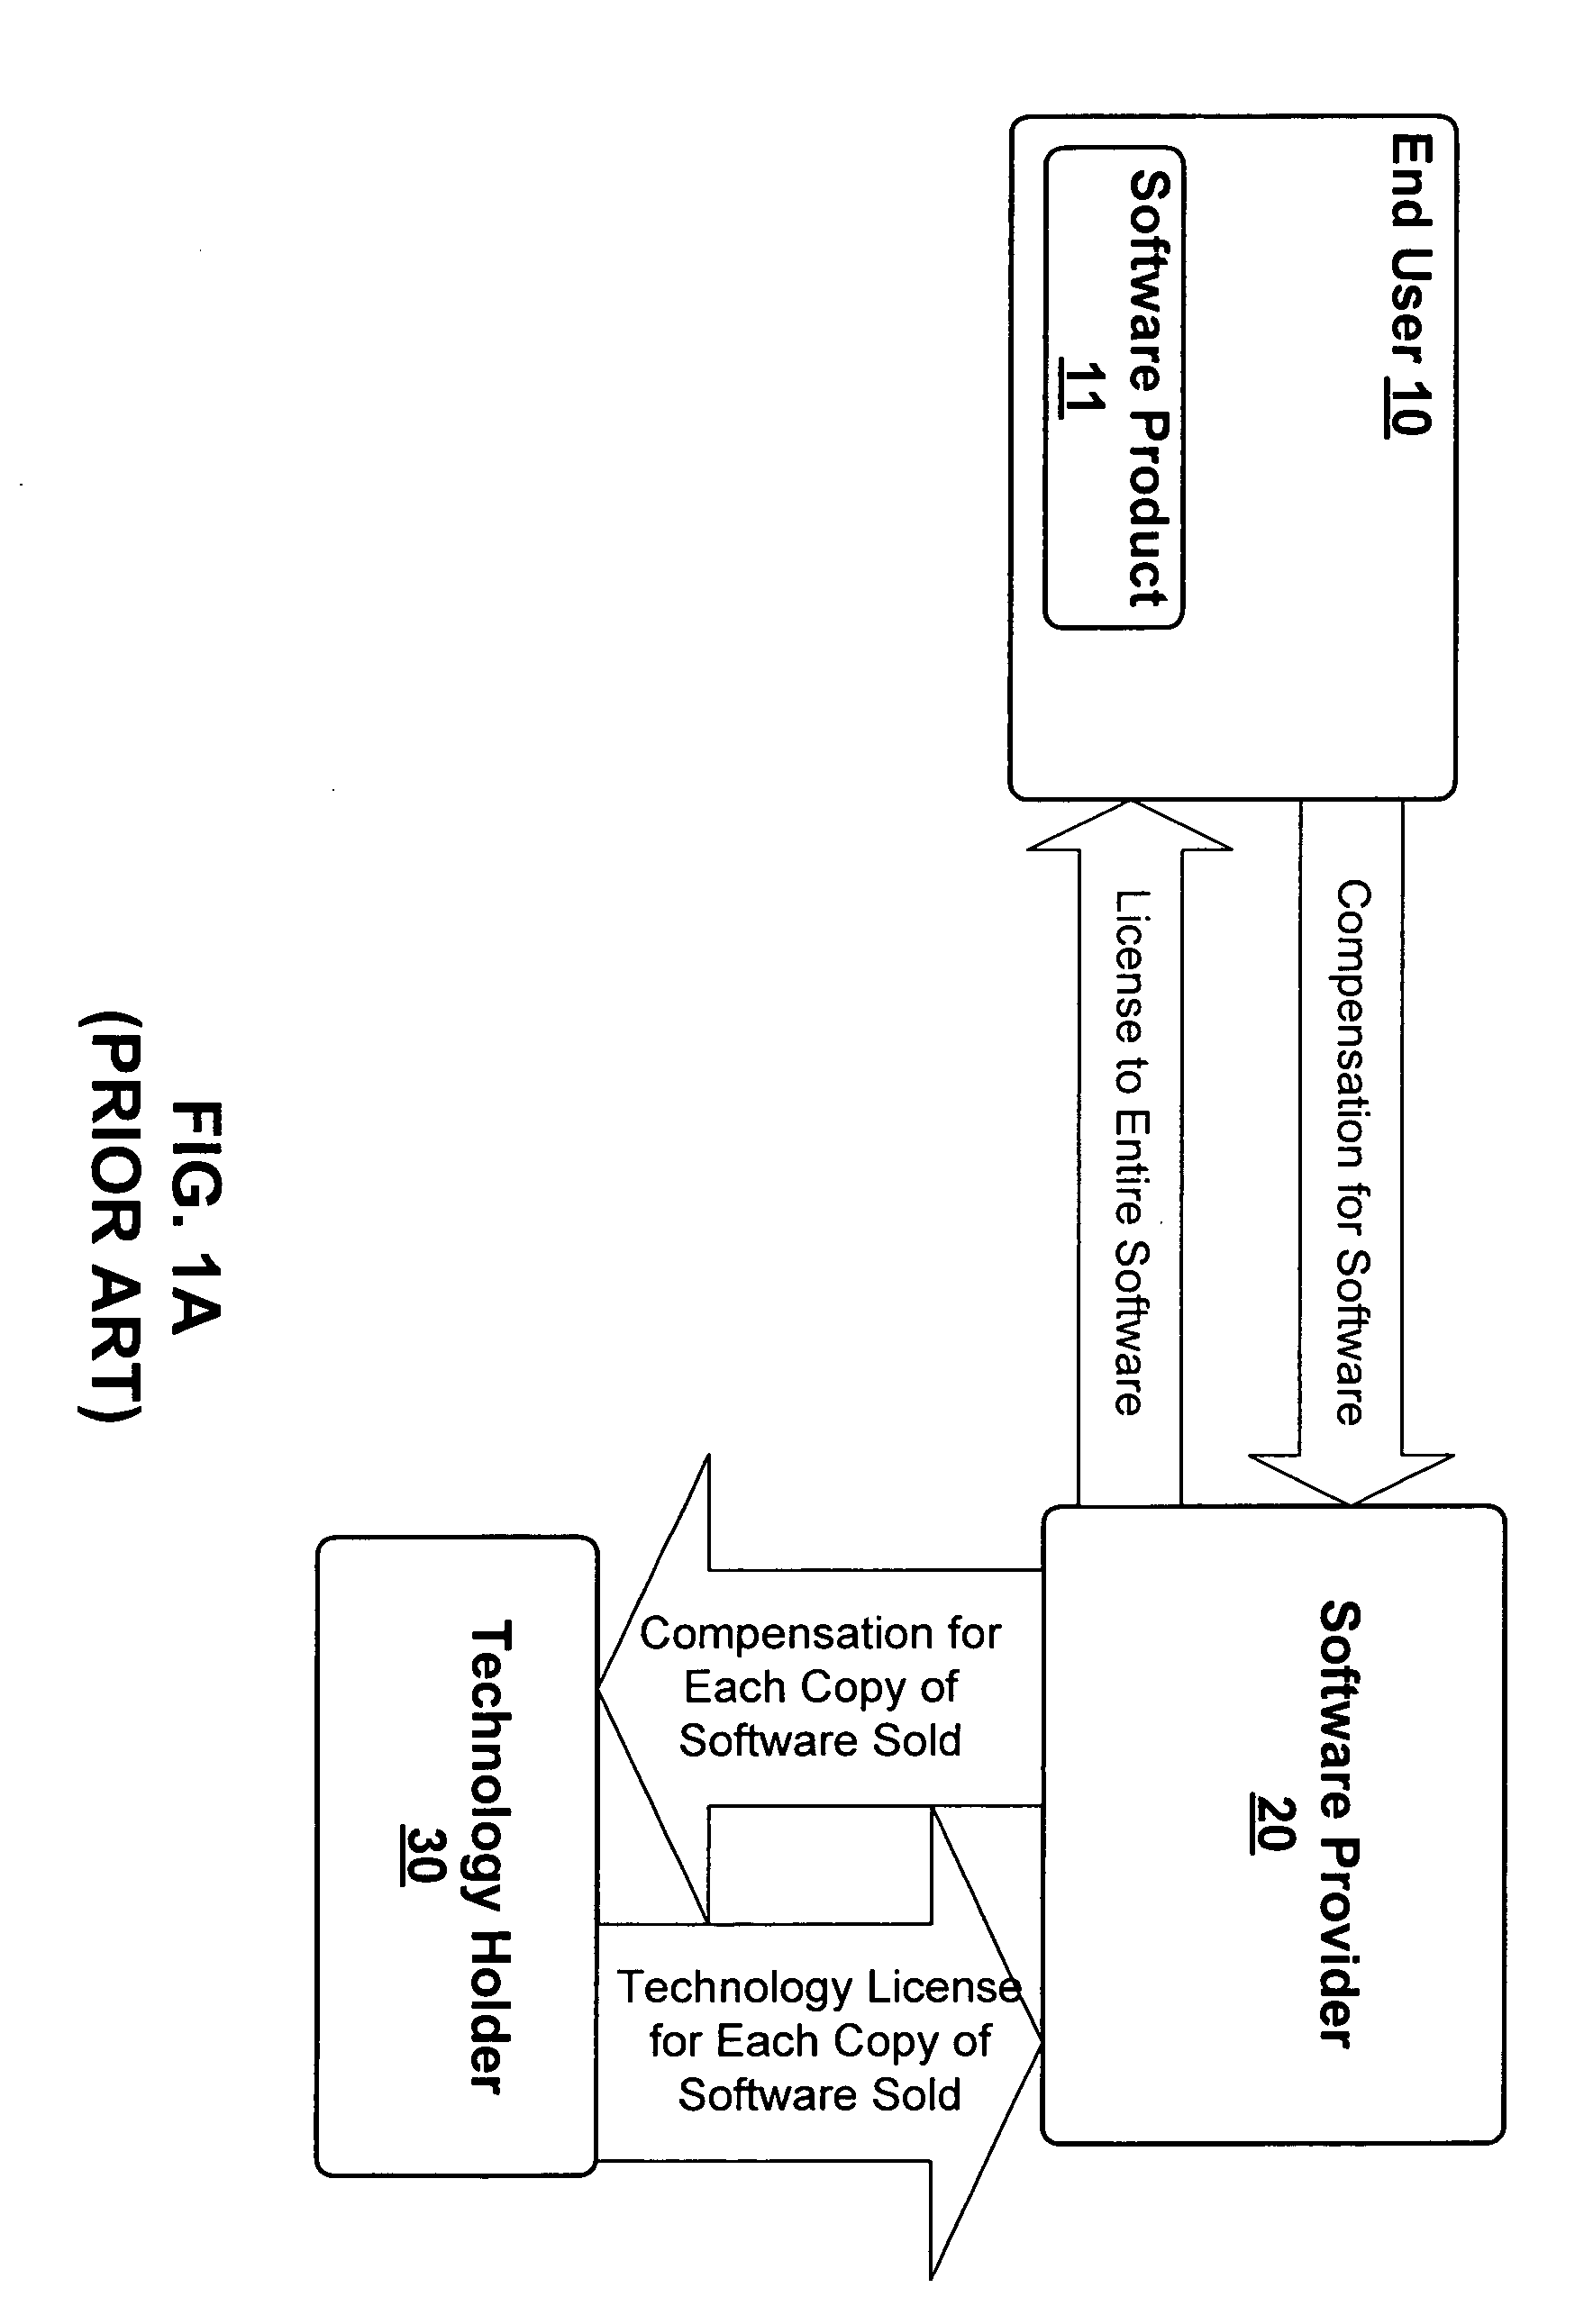 System and method for licensing software